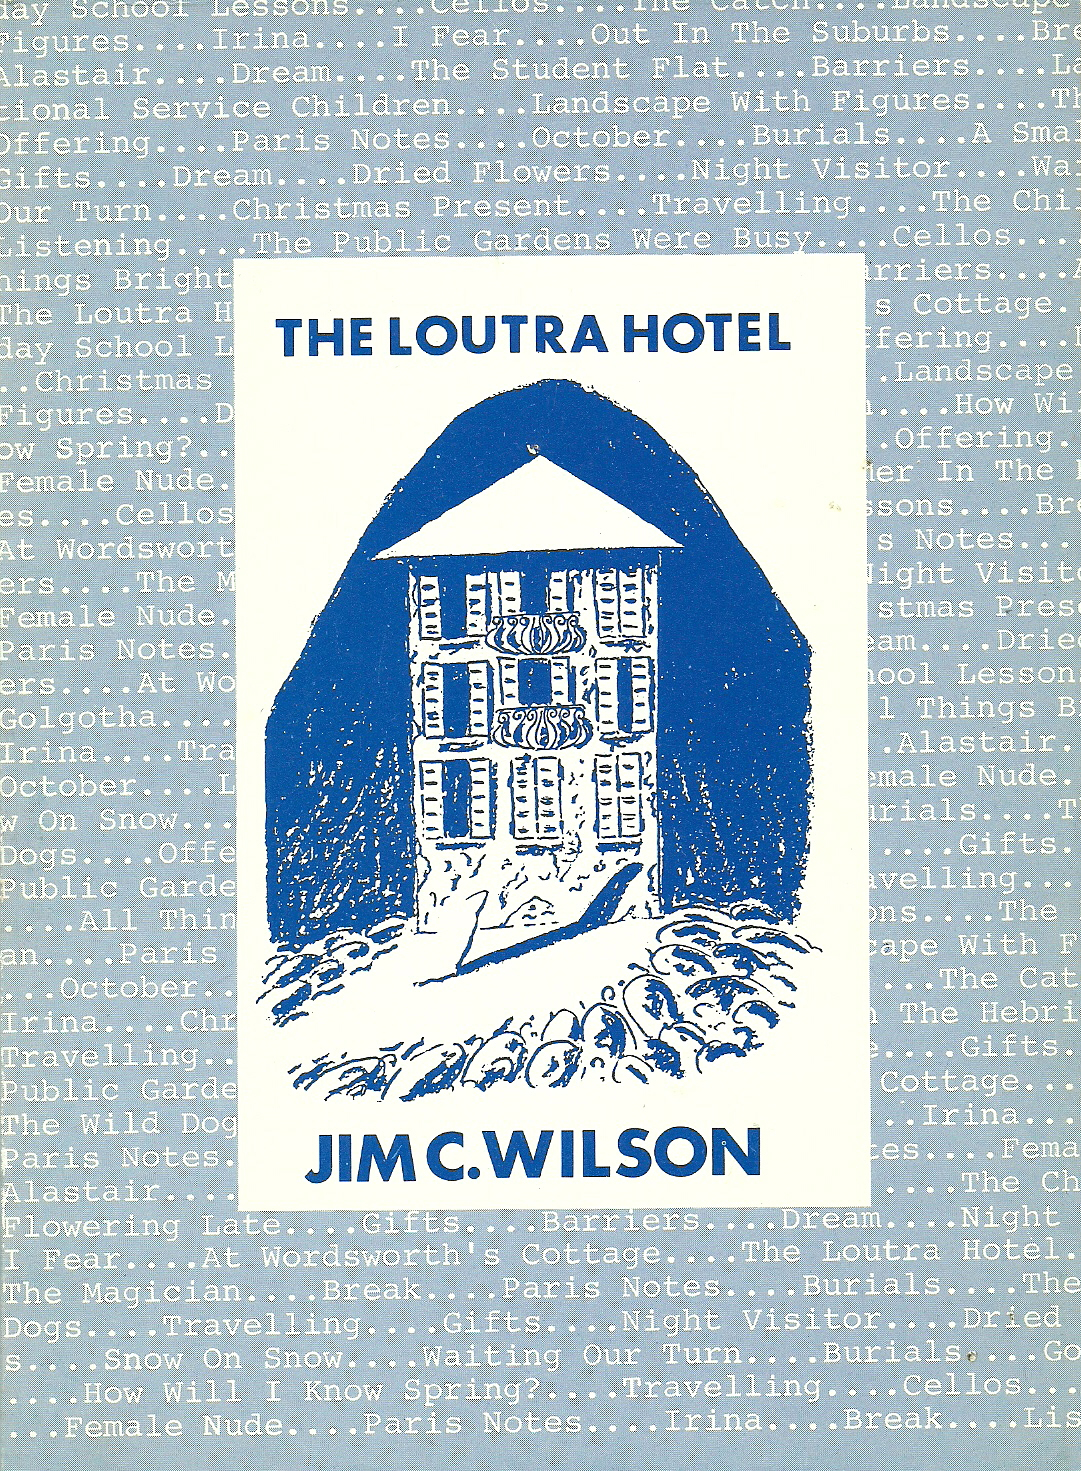 The Loutra Hotel (Making Waves)